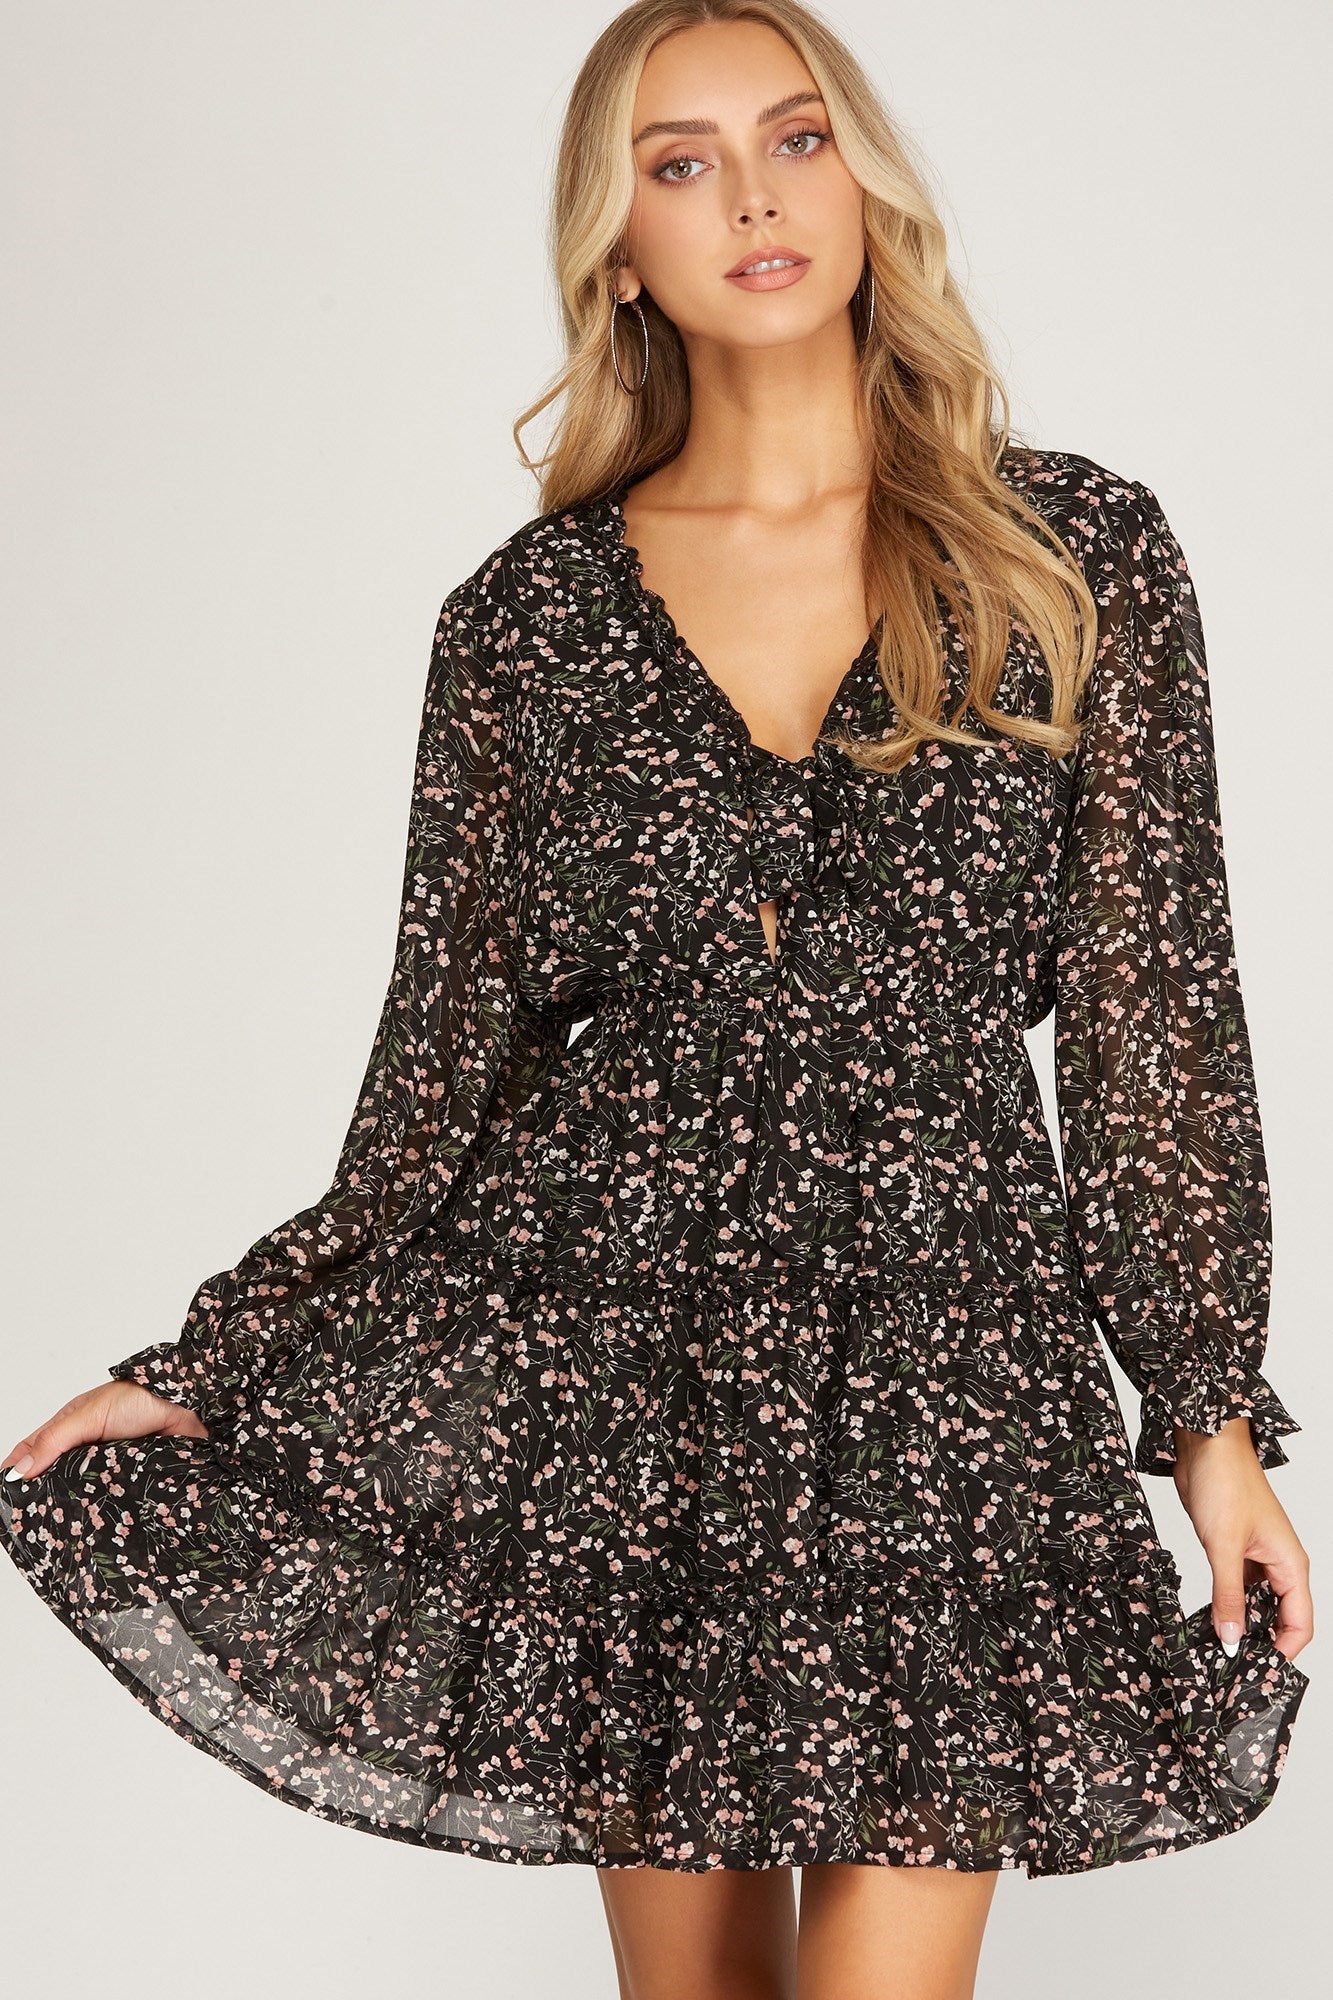 TIE FRONT RUFFLED FLORAL DRESS